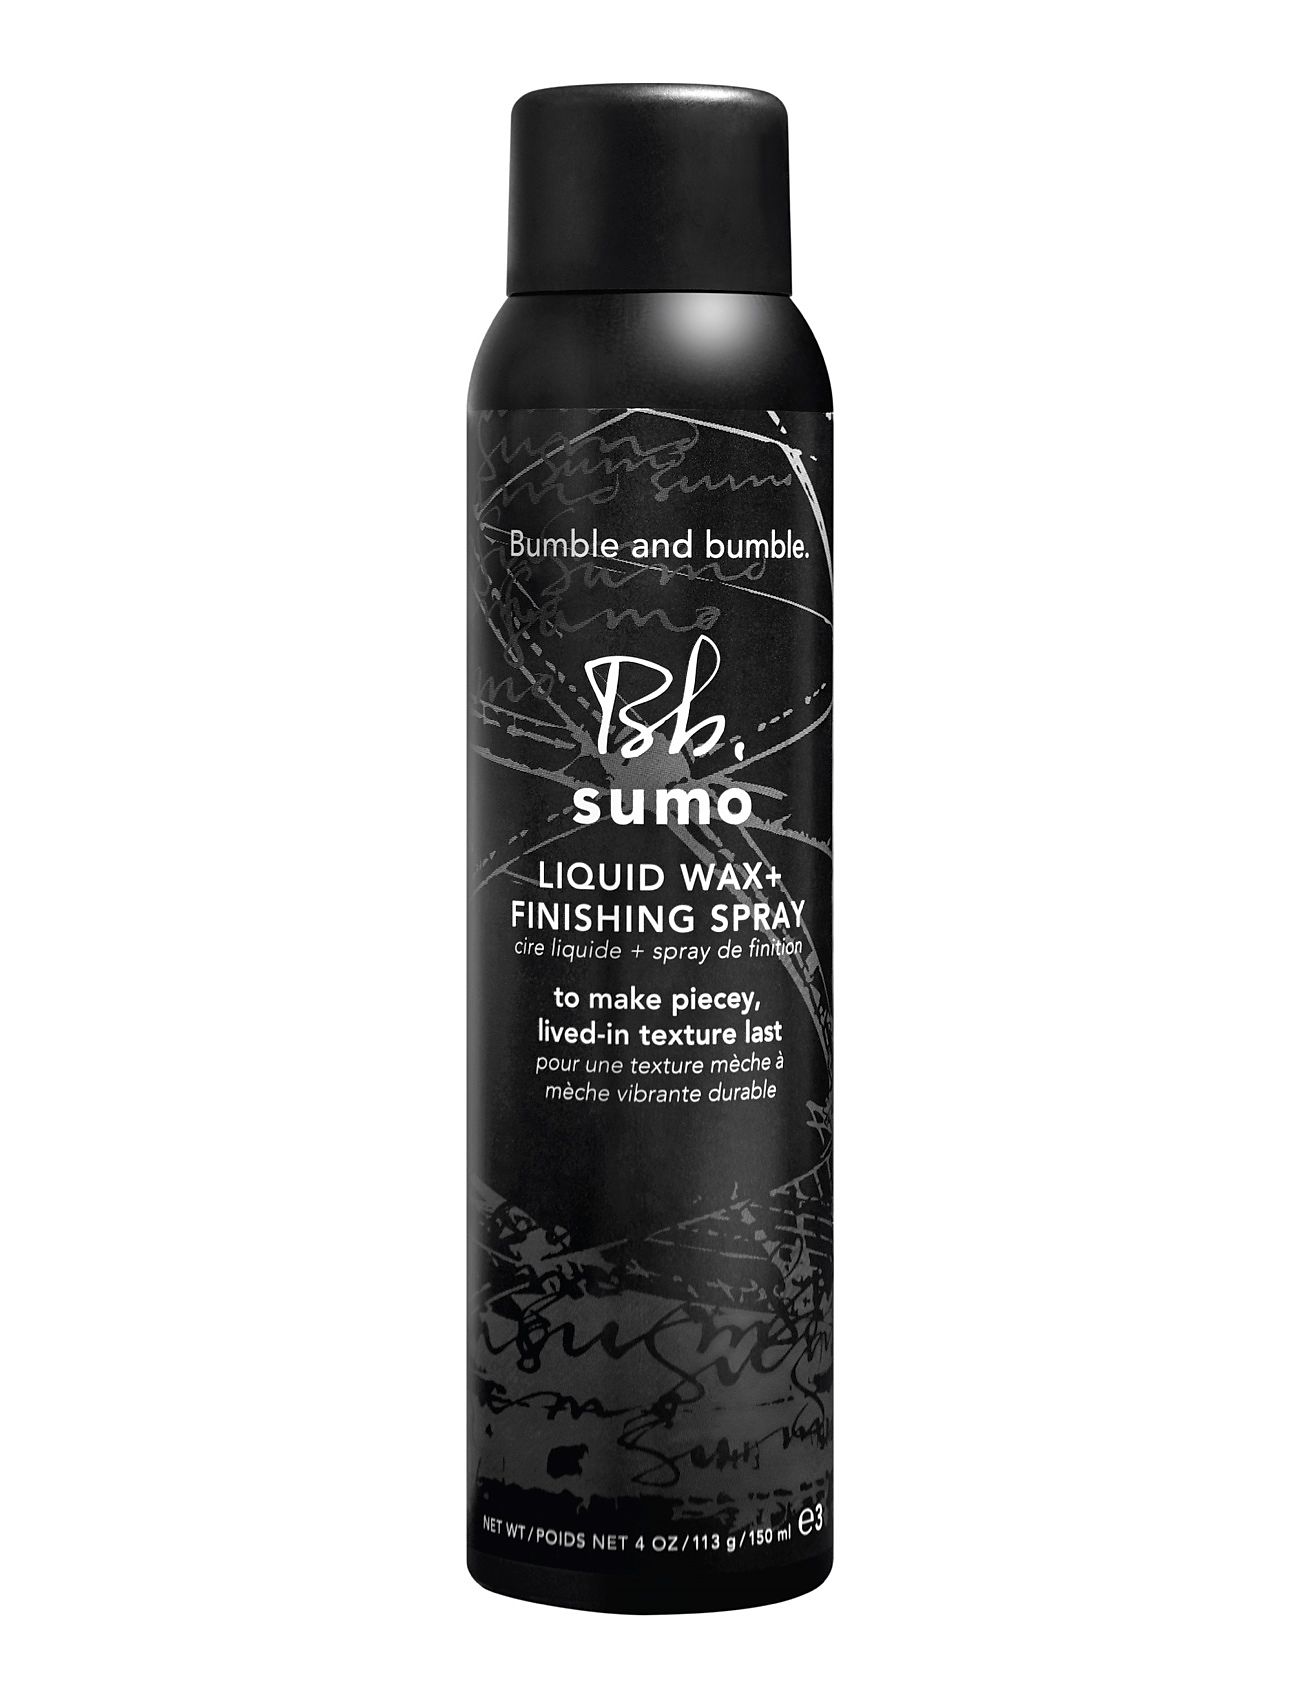 "Bumble and Bumble" "Sumo Finishing Spray Wax & Gel Nude Bumble And